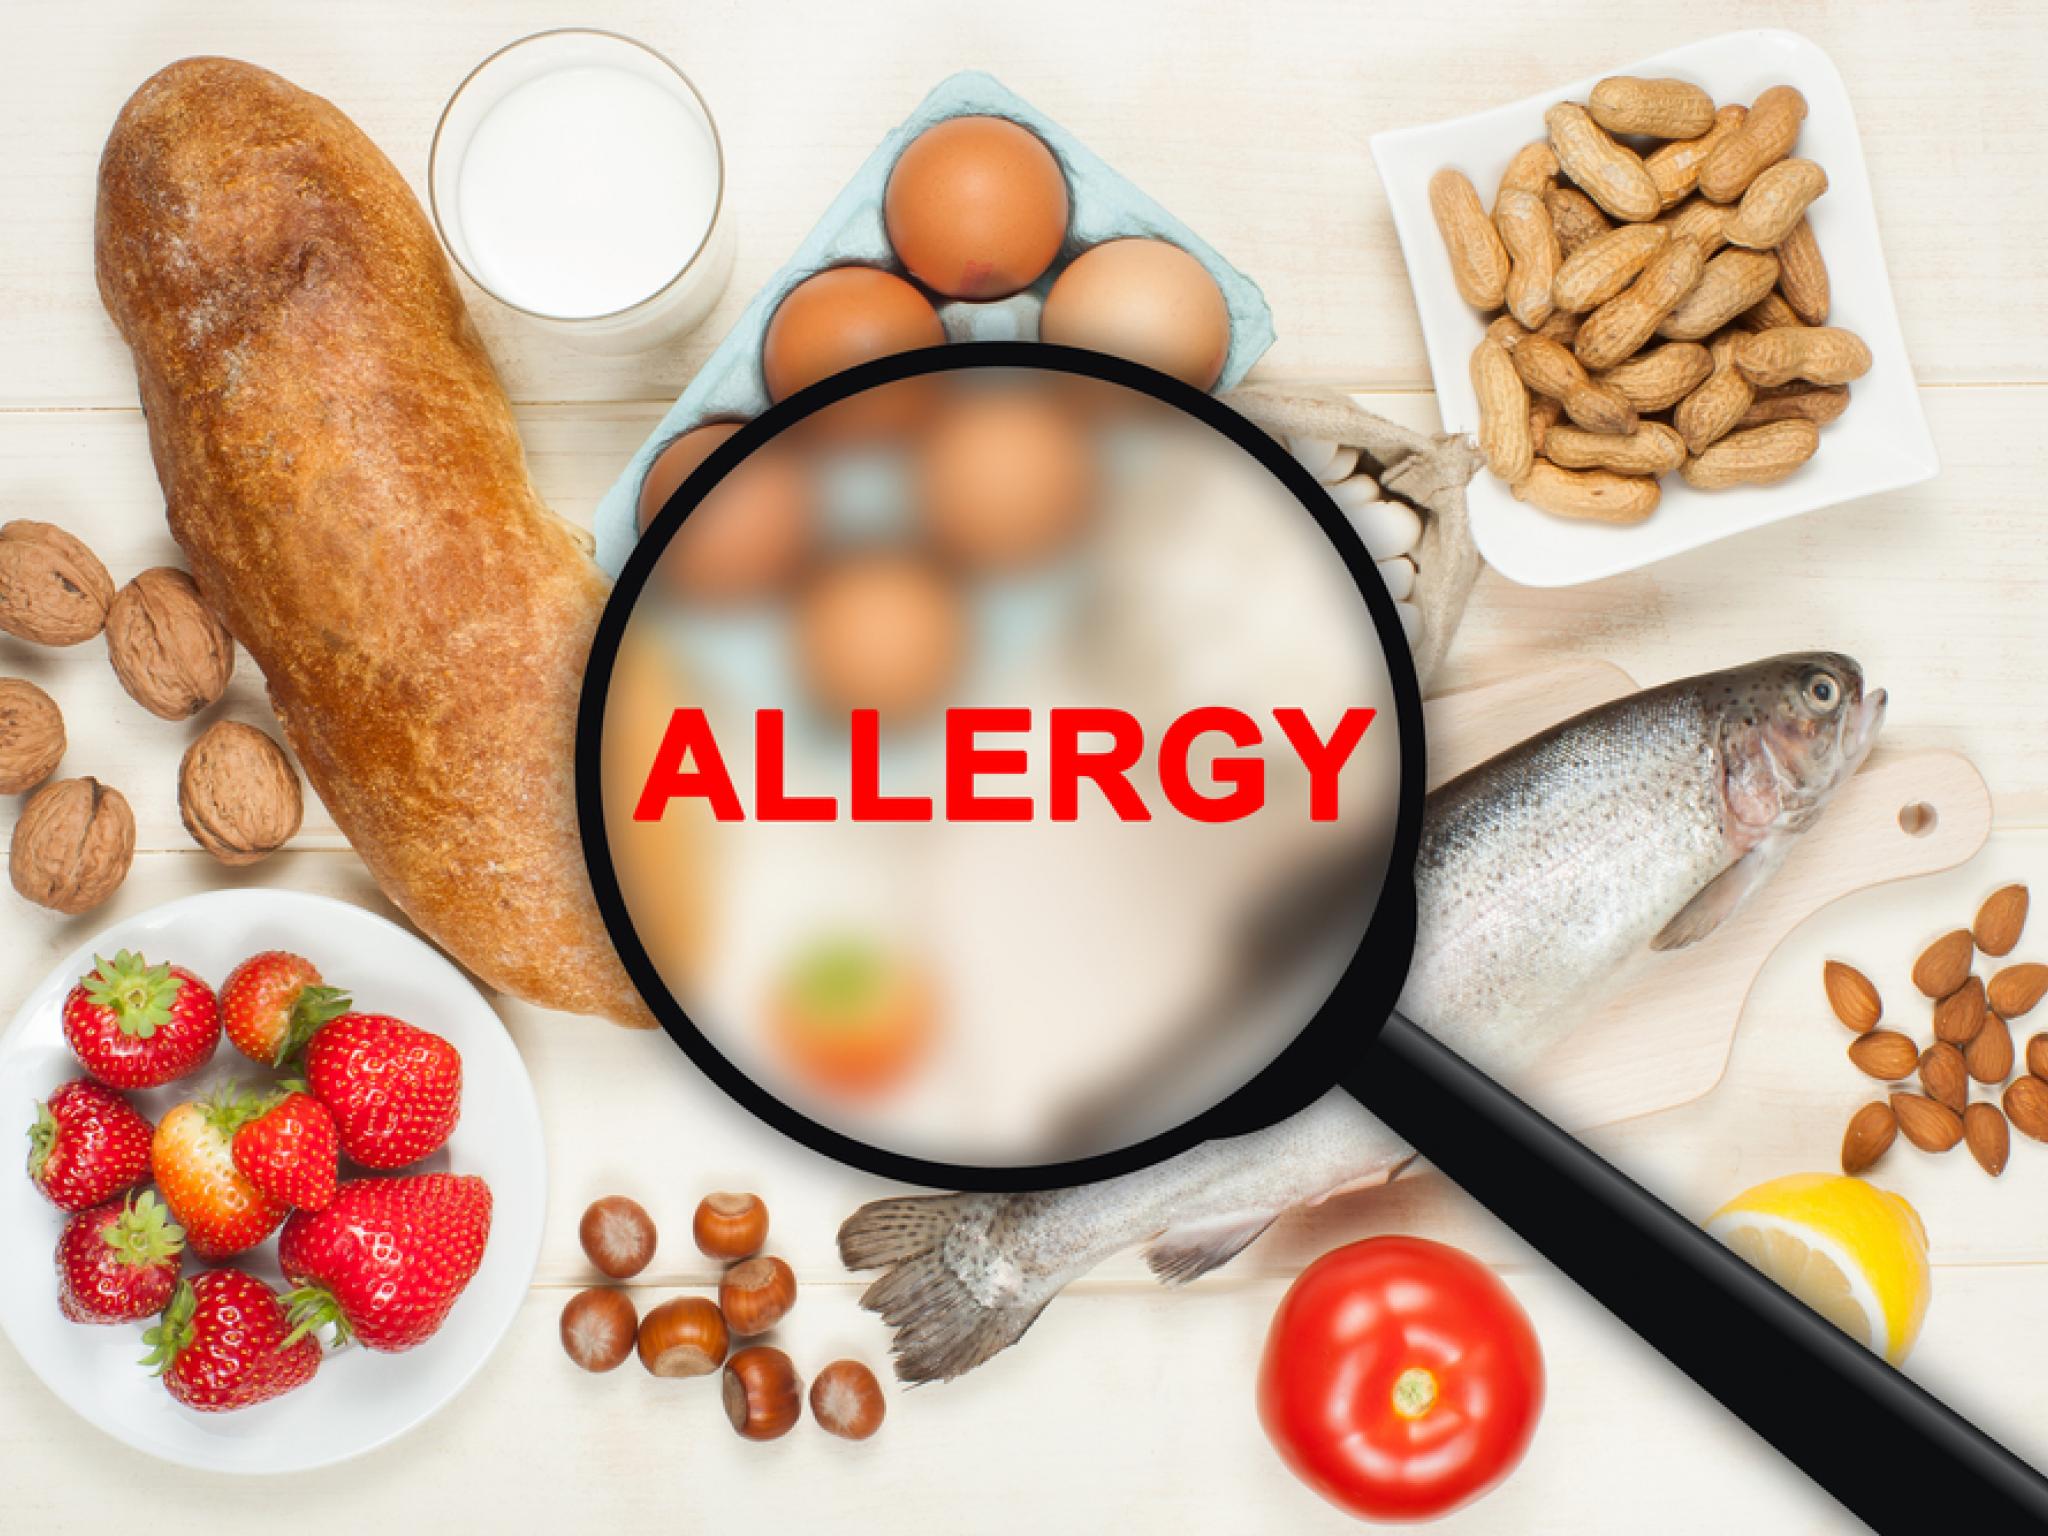  oral-allergy-medication-for-emergencies---aquestive-therapeutics-investigational-therapy-works-even-with-exposure-to-liquids-of-different-temperatures-data-shows 